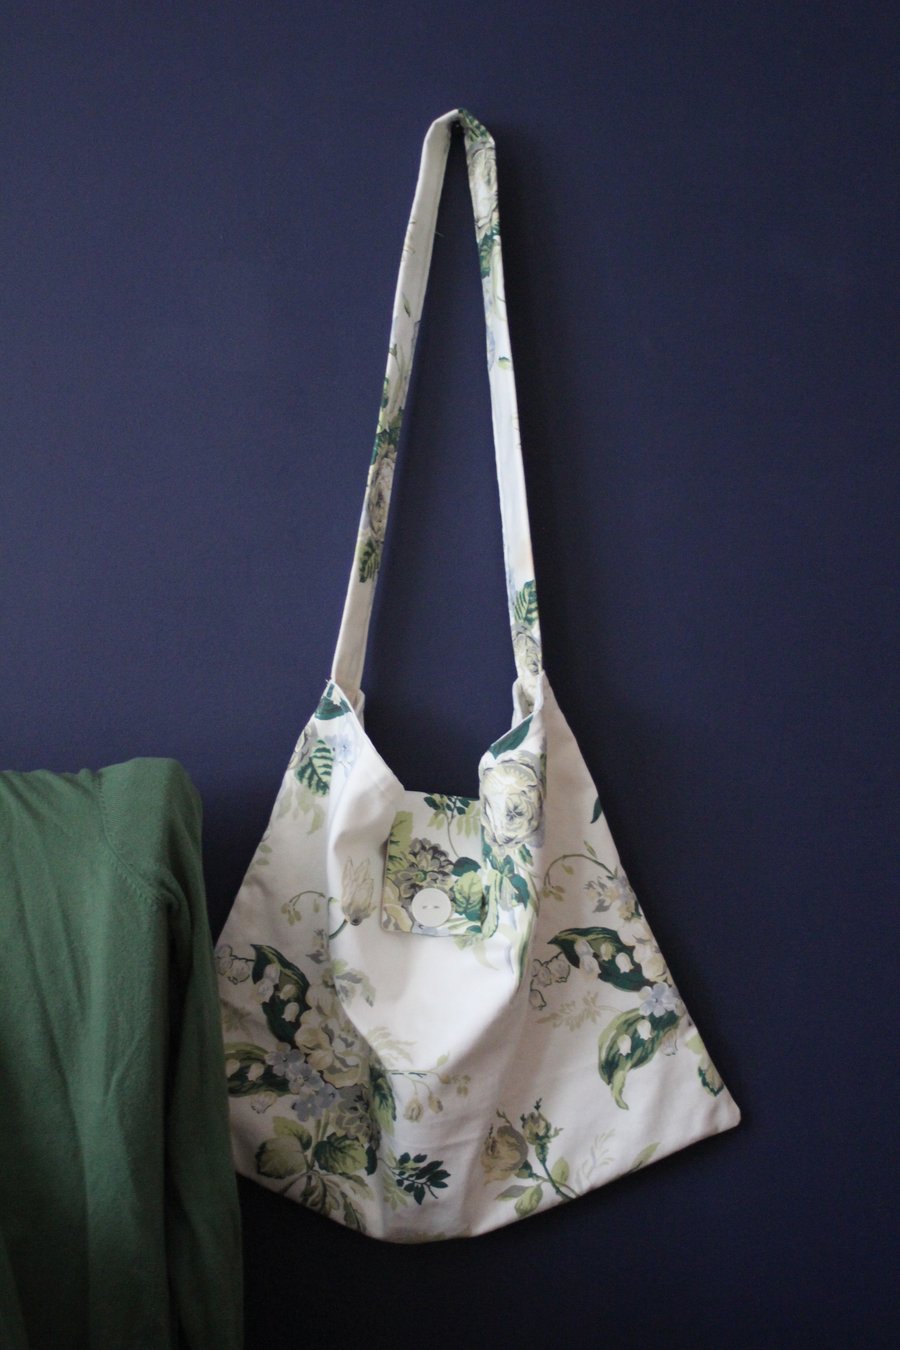 Cross-body messenger style bag made from vintage Laura Ashley Winter Lily fabric